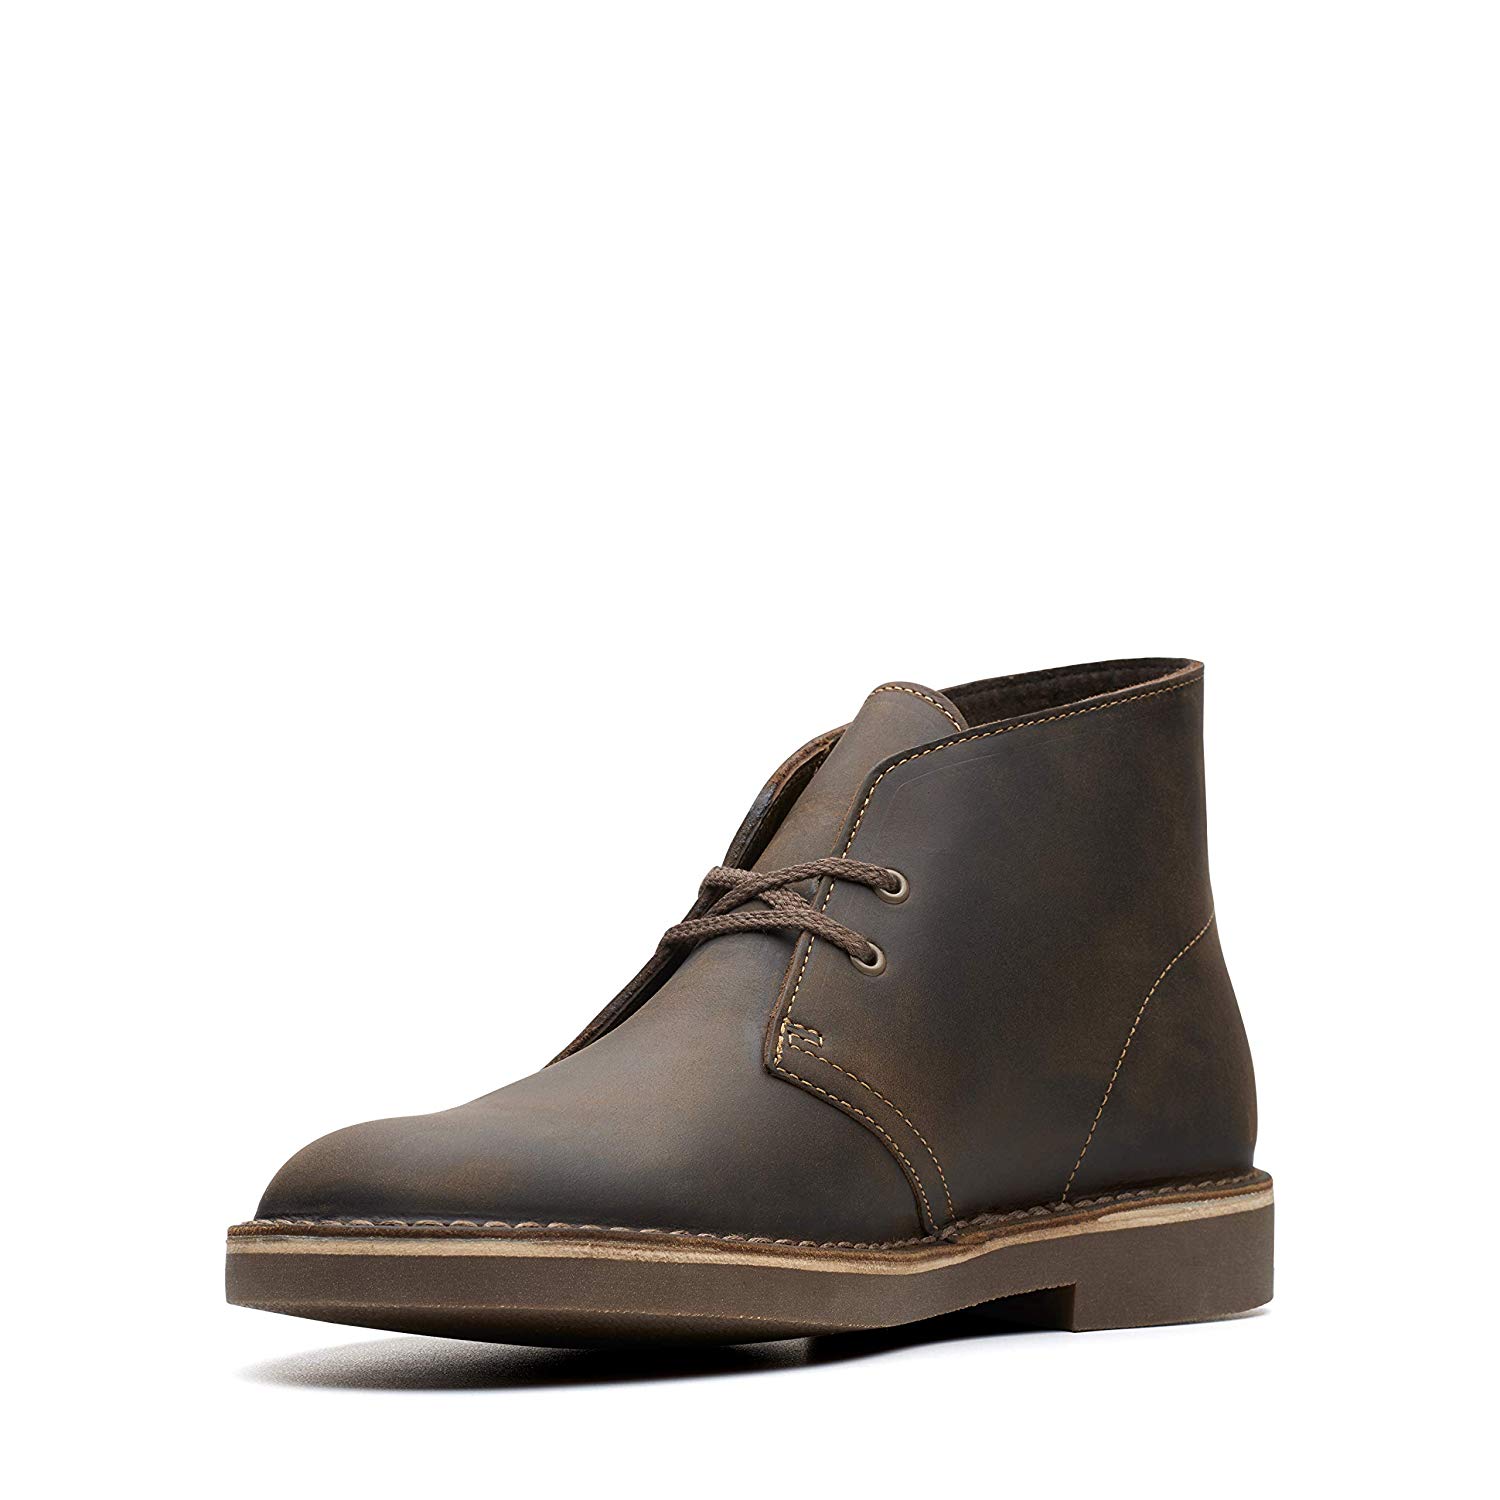 clarks bushacre 2 beeswax care